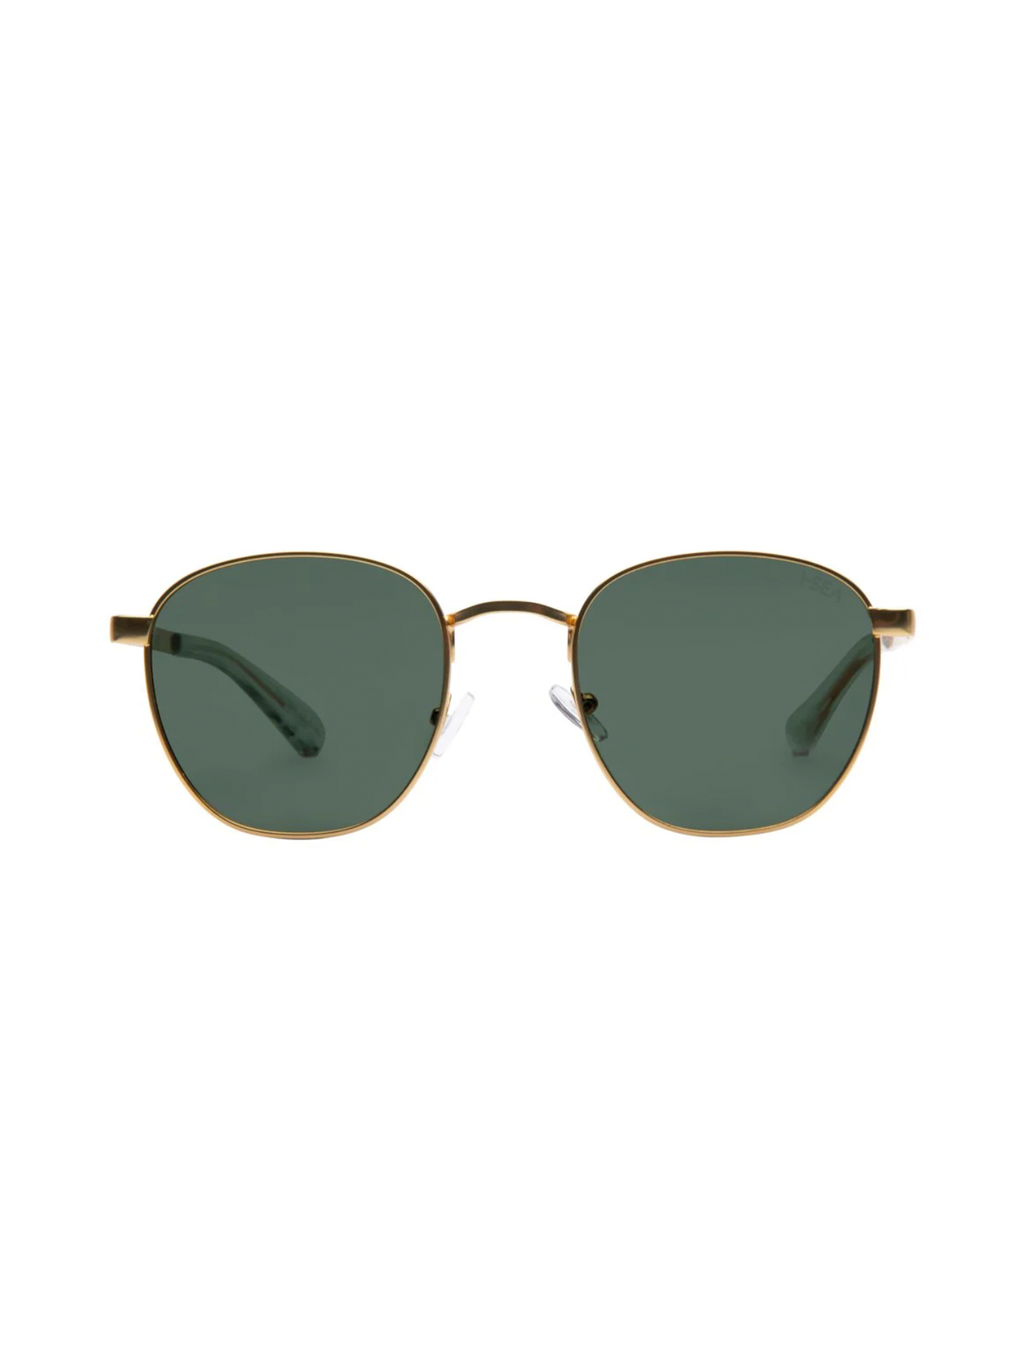 Cooper Sunnies in Gold/Green - Stitch And Feather